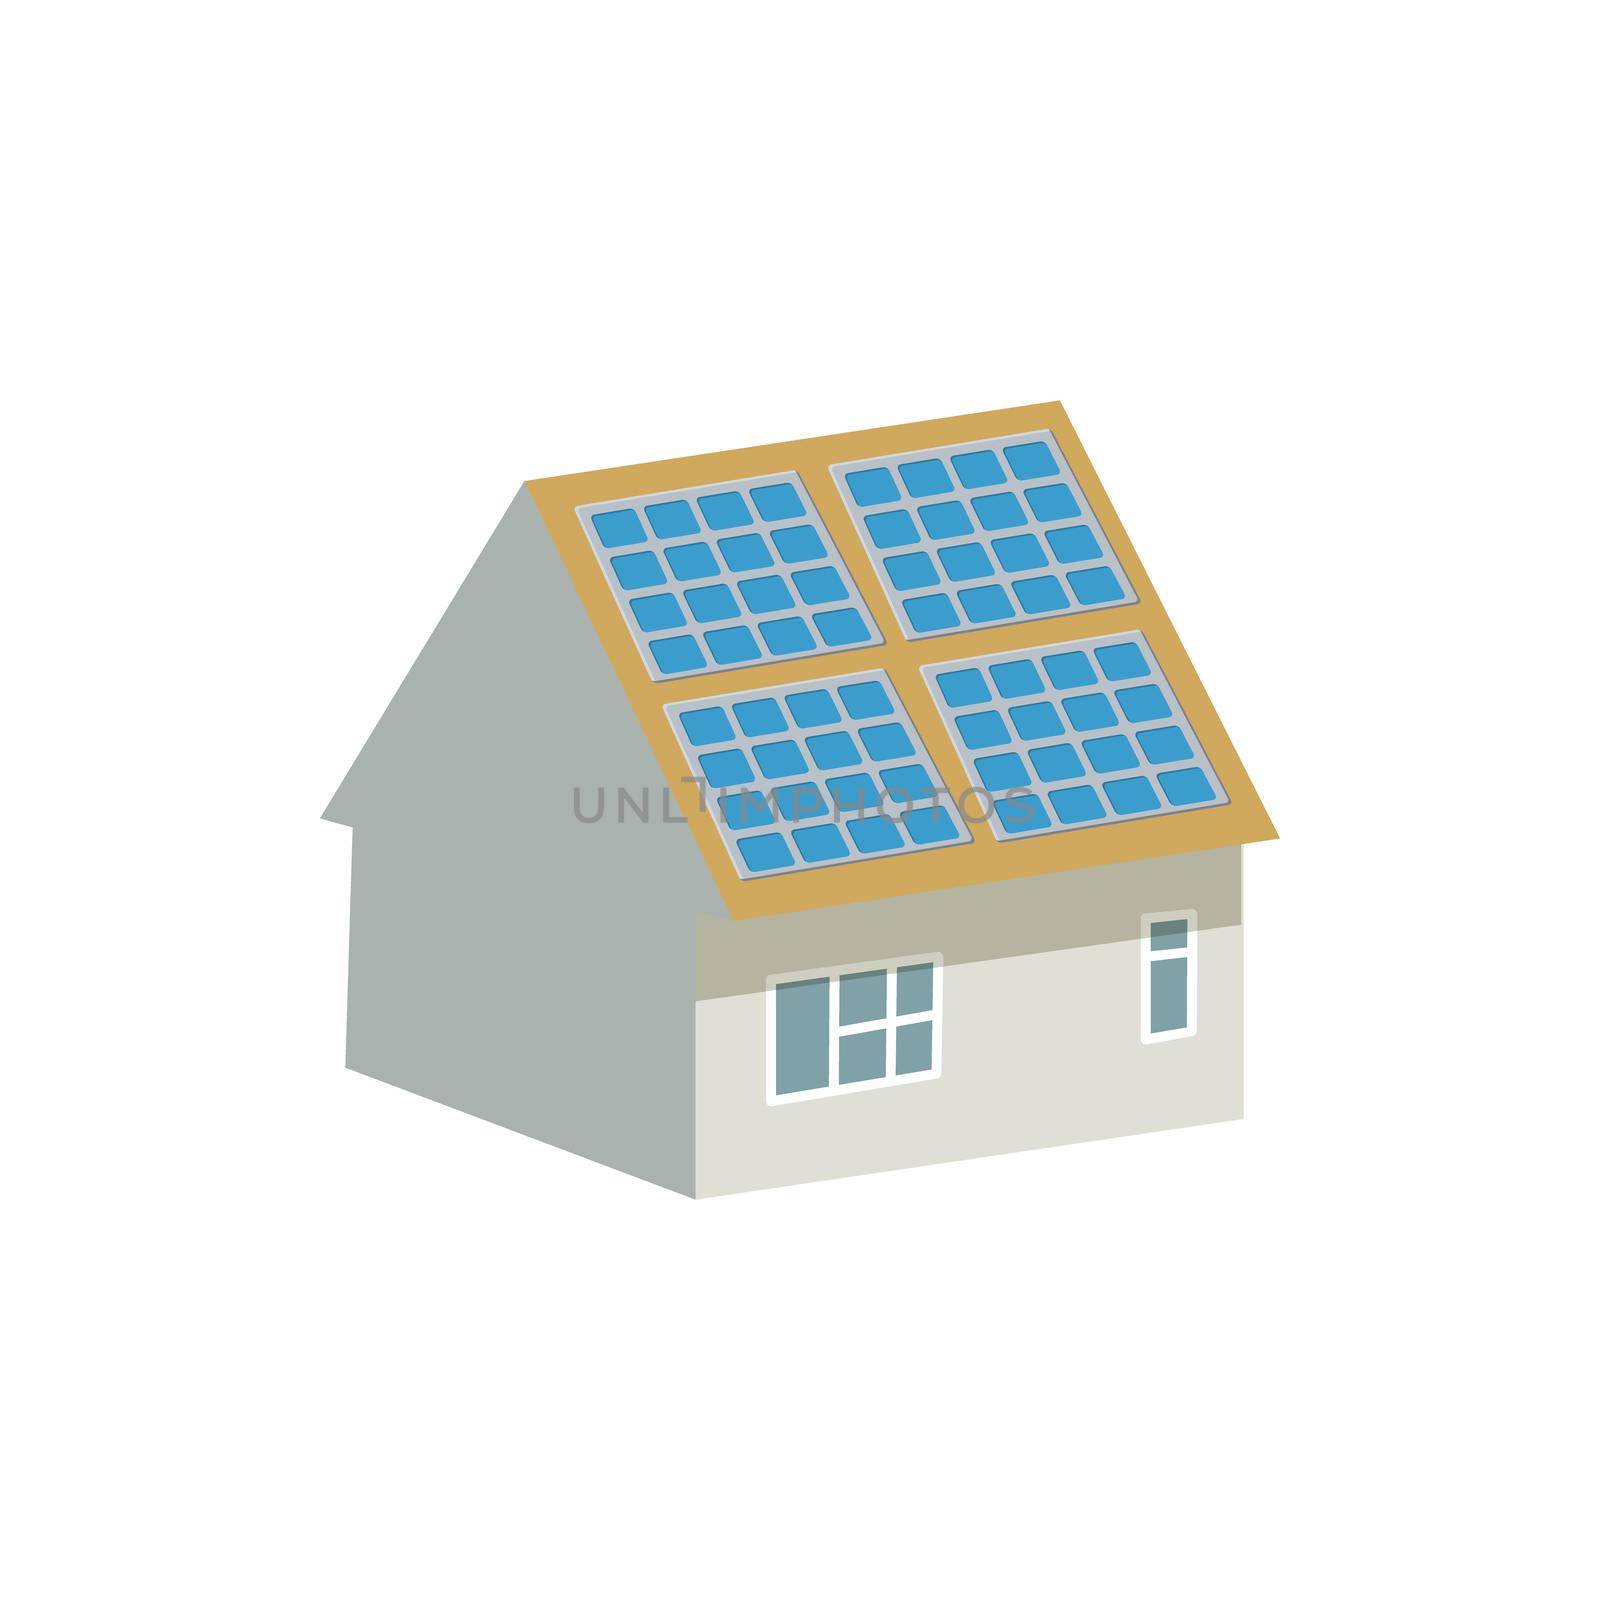 House with solar batteries on the roof icon by ylivdesign